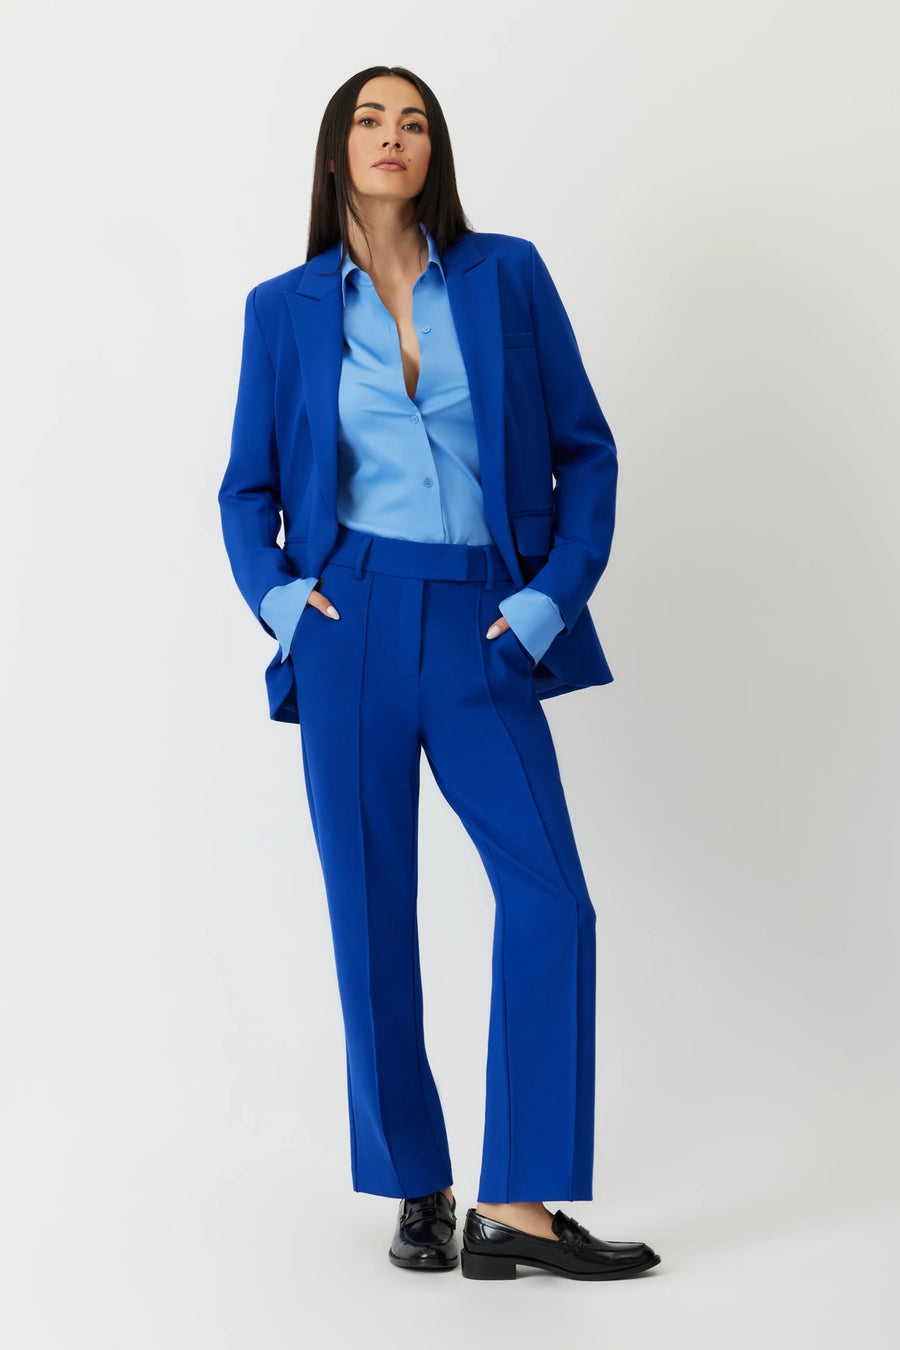 The Paris mid rise straight leg ponte trouser in lapis blue by Greyven